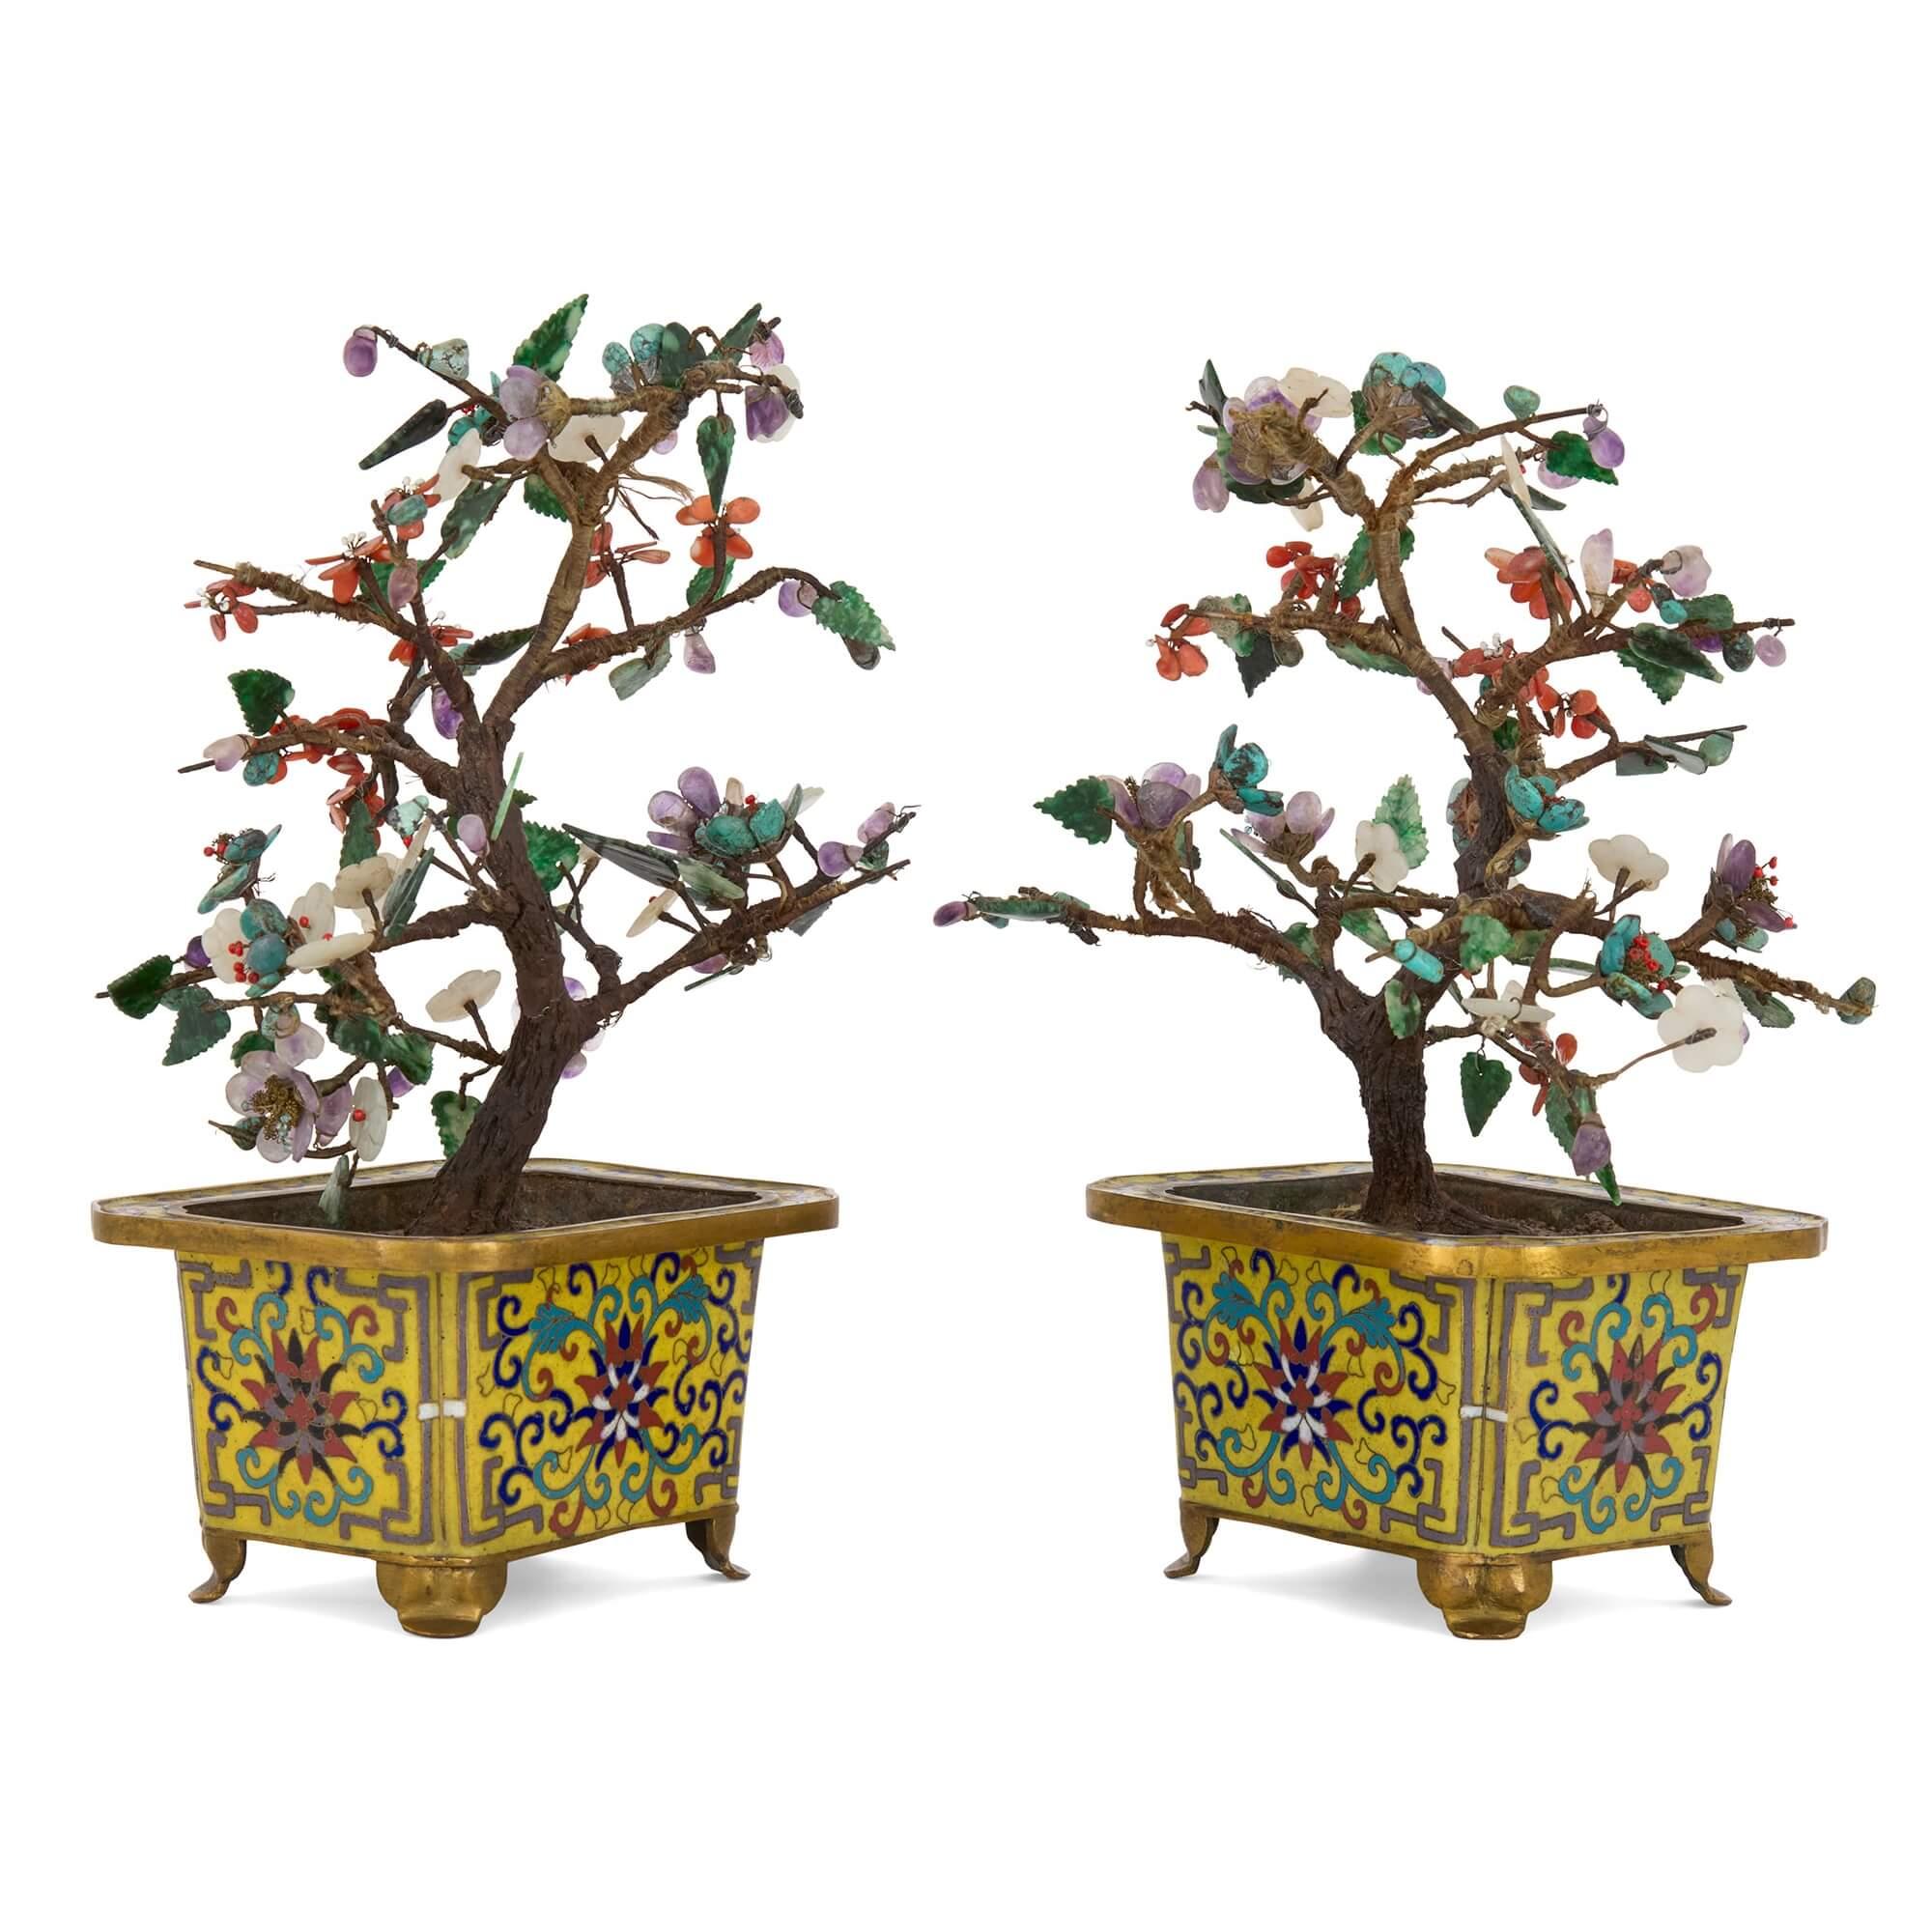 Carved Pair of Chinese Hardstone, Jade and Cloisonné Enamel Flower Tree Models For Sale